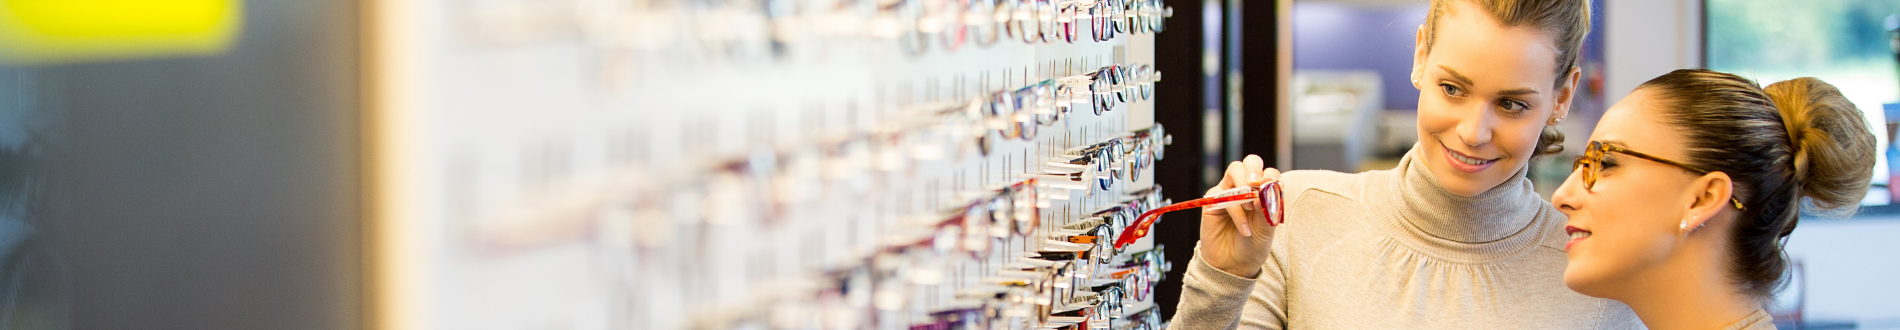 Background image for Optique Opticians section